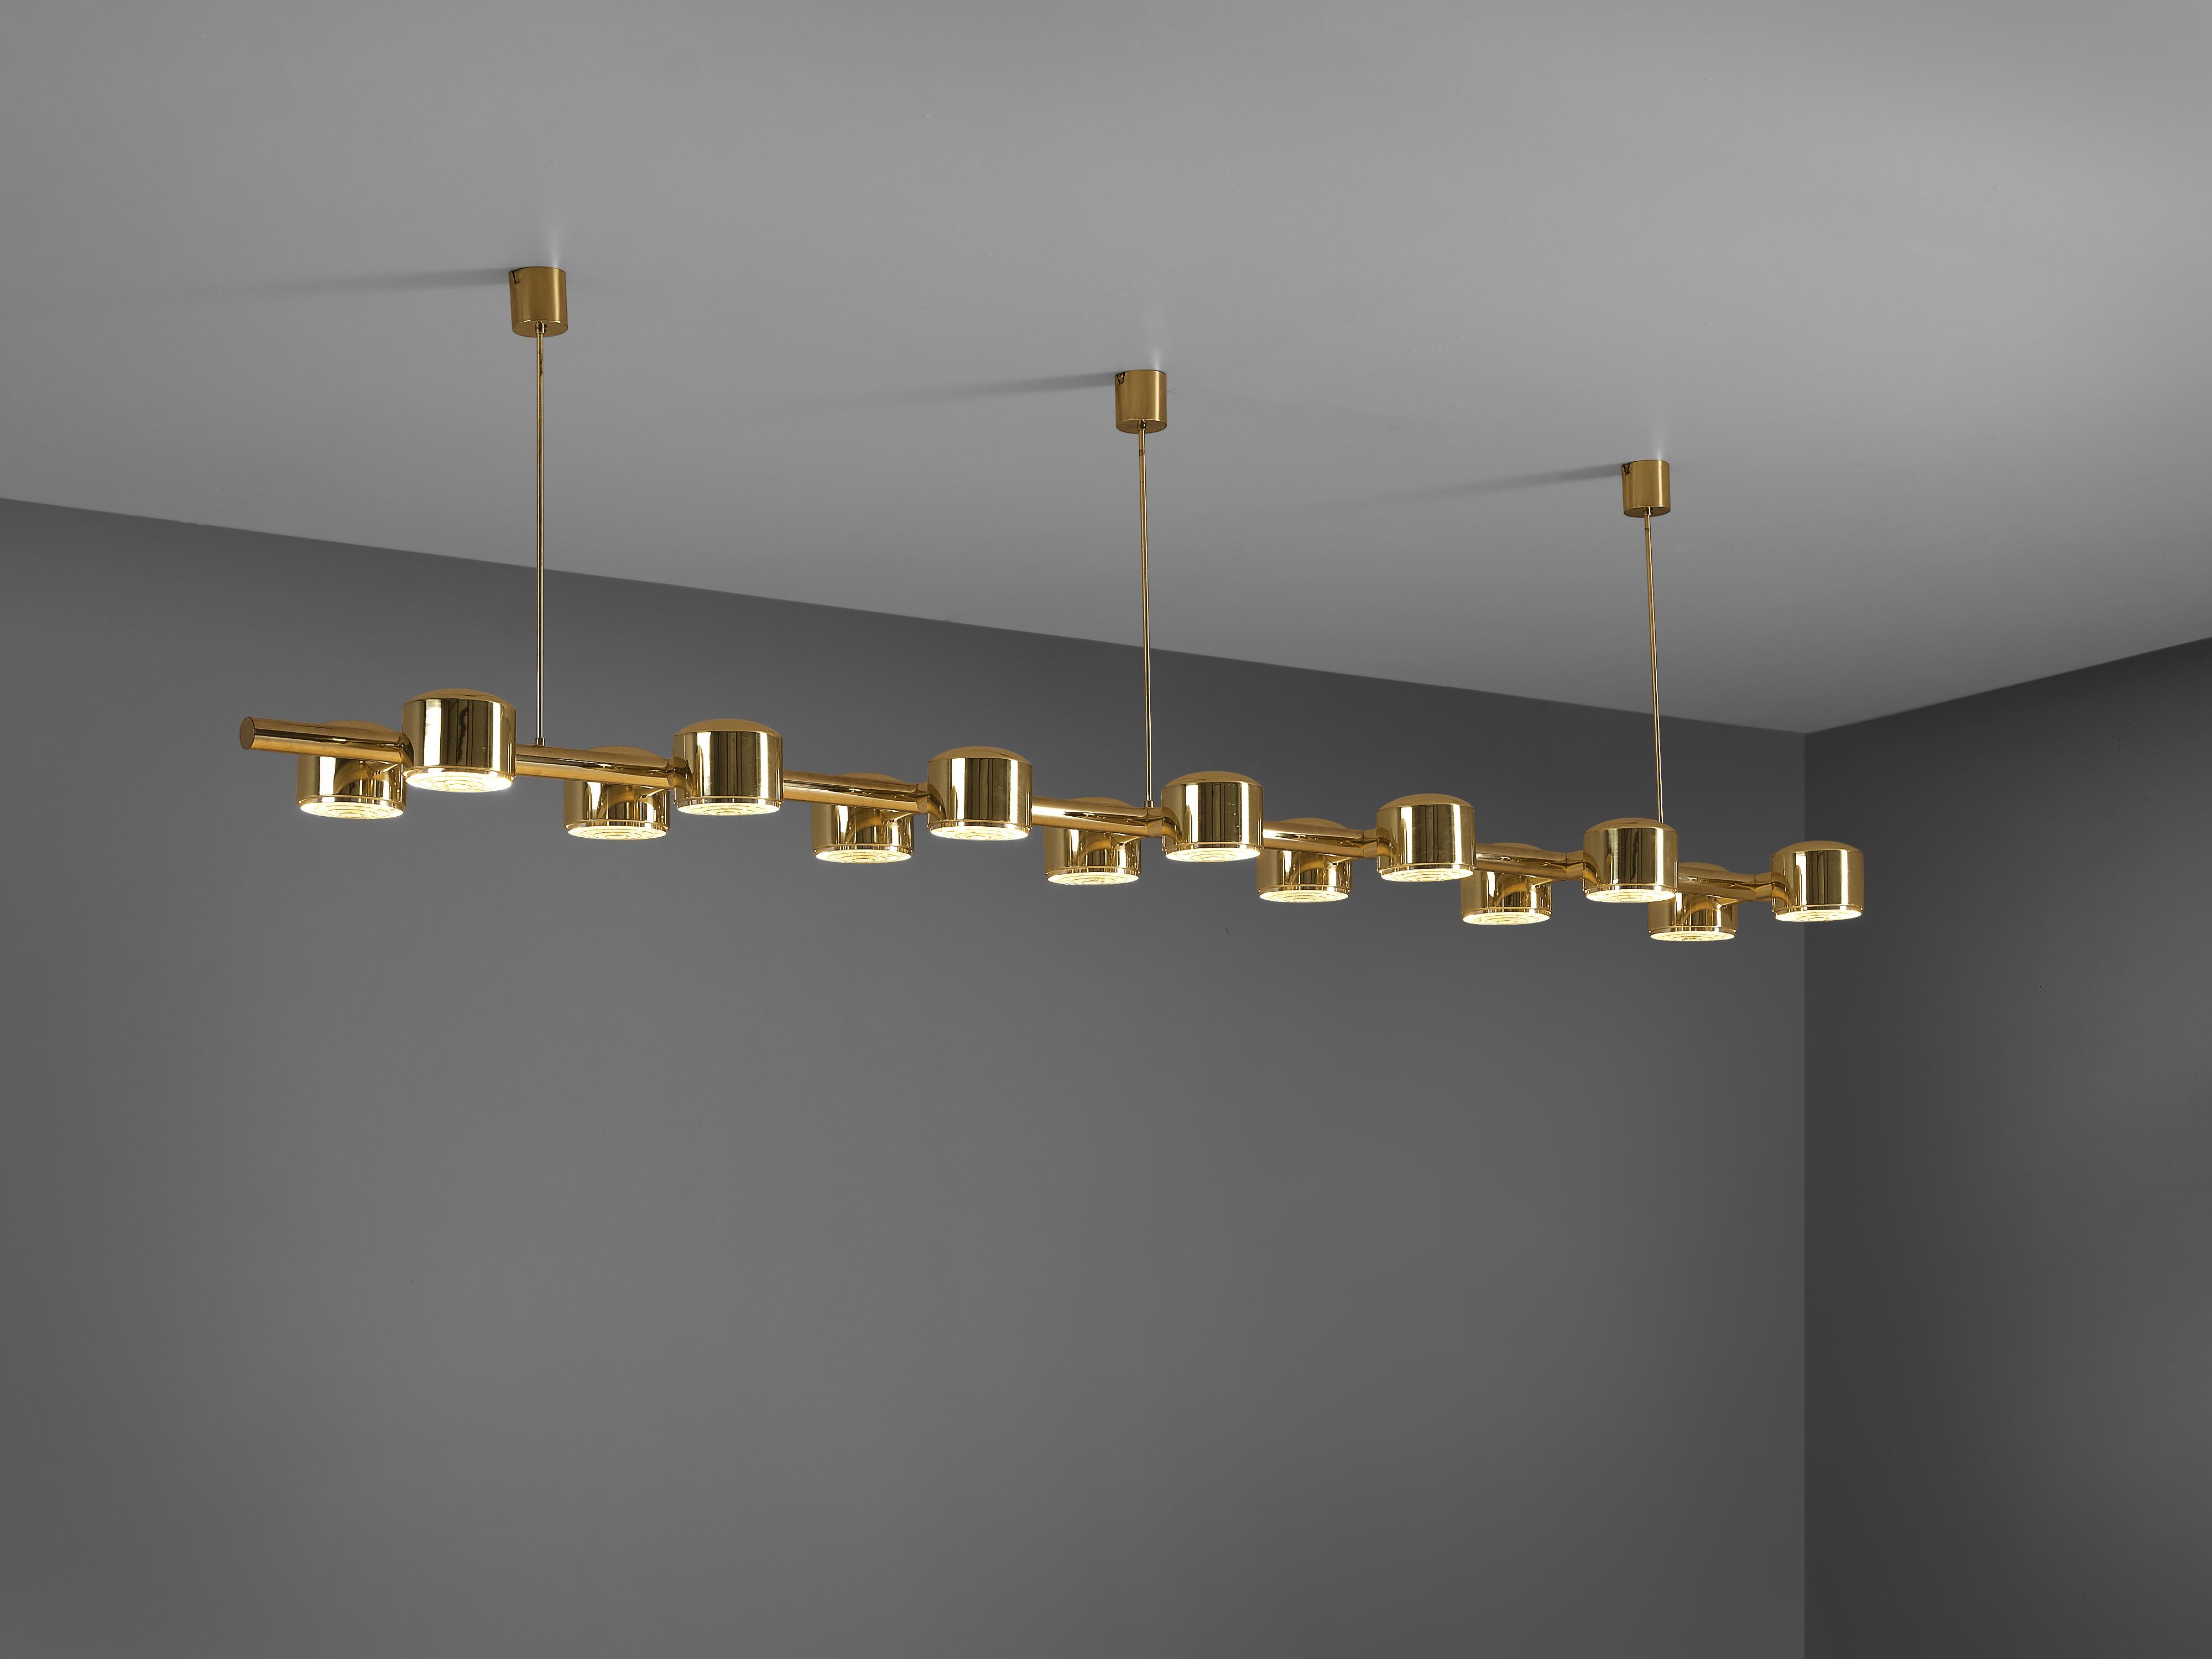 Hans-Agne Jakobsson for Markaryd, ceiling light, model T 746/14, Sweden, 1960s measures: 10.5 ft.

Hans-Agne Jakobsson designed this large chandelier with fourteen cylindrical lightbulbs paired on a line. The brass reflects the light vertically